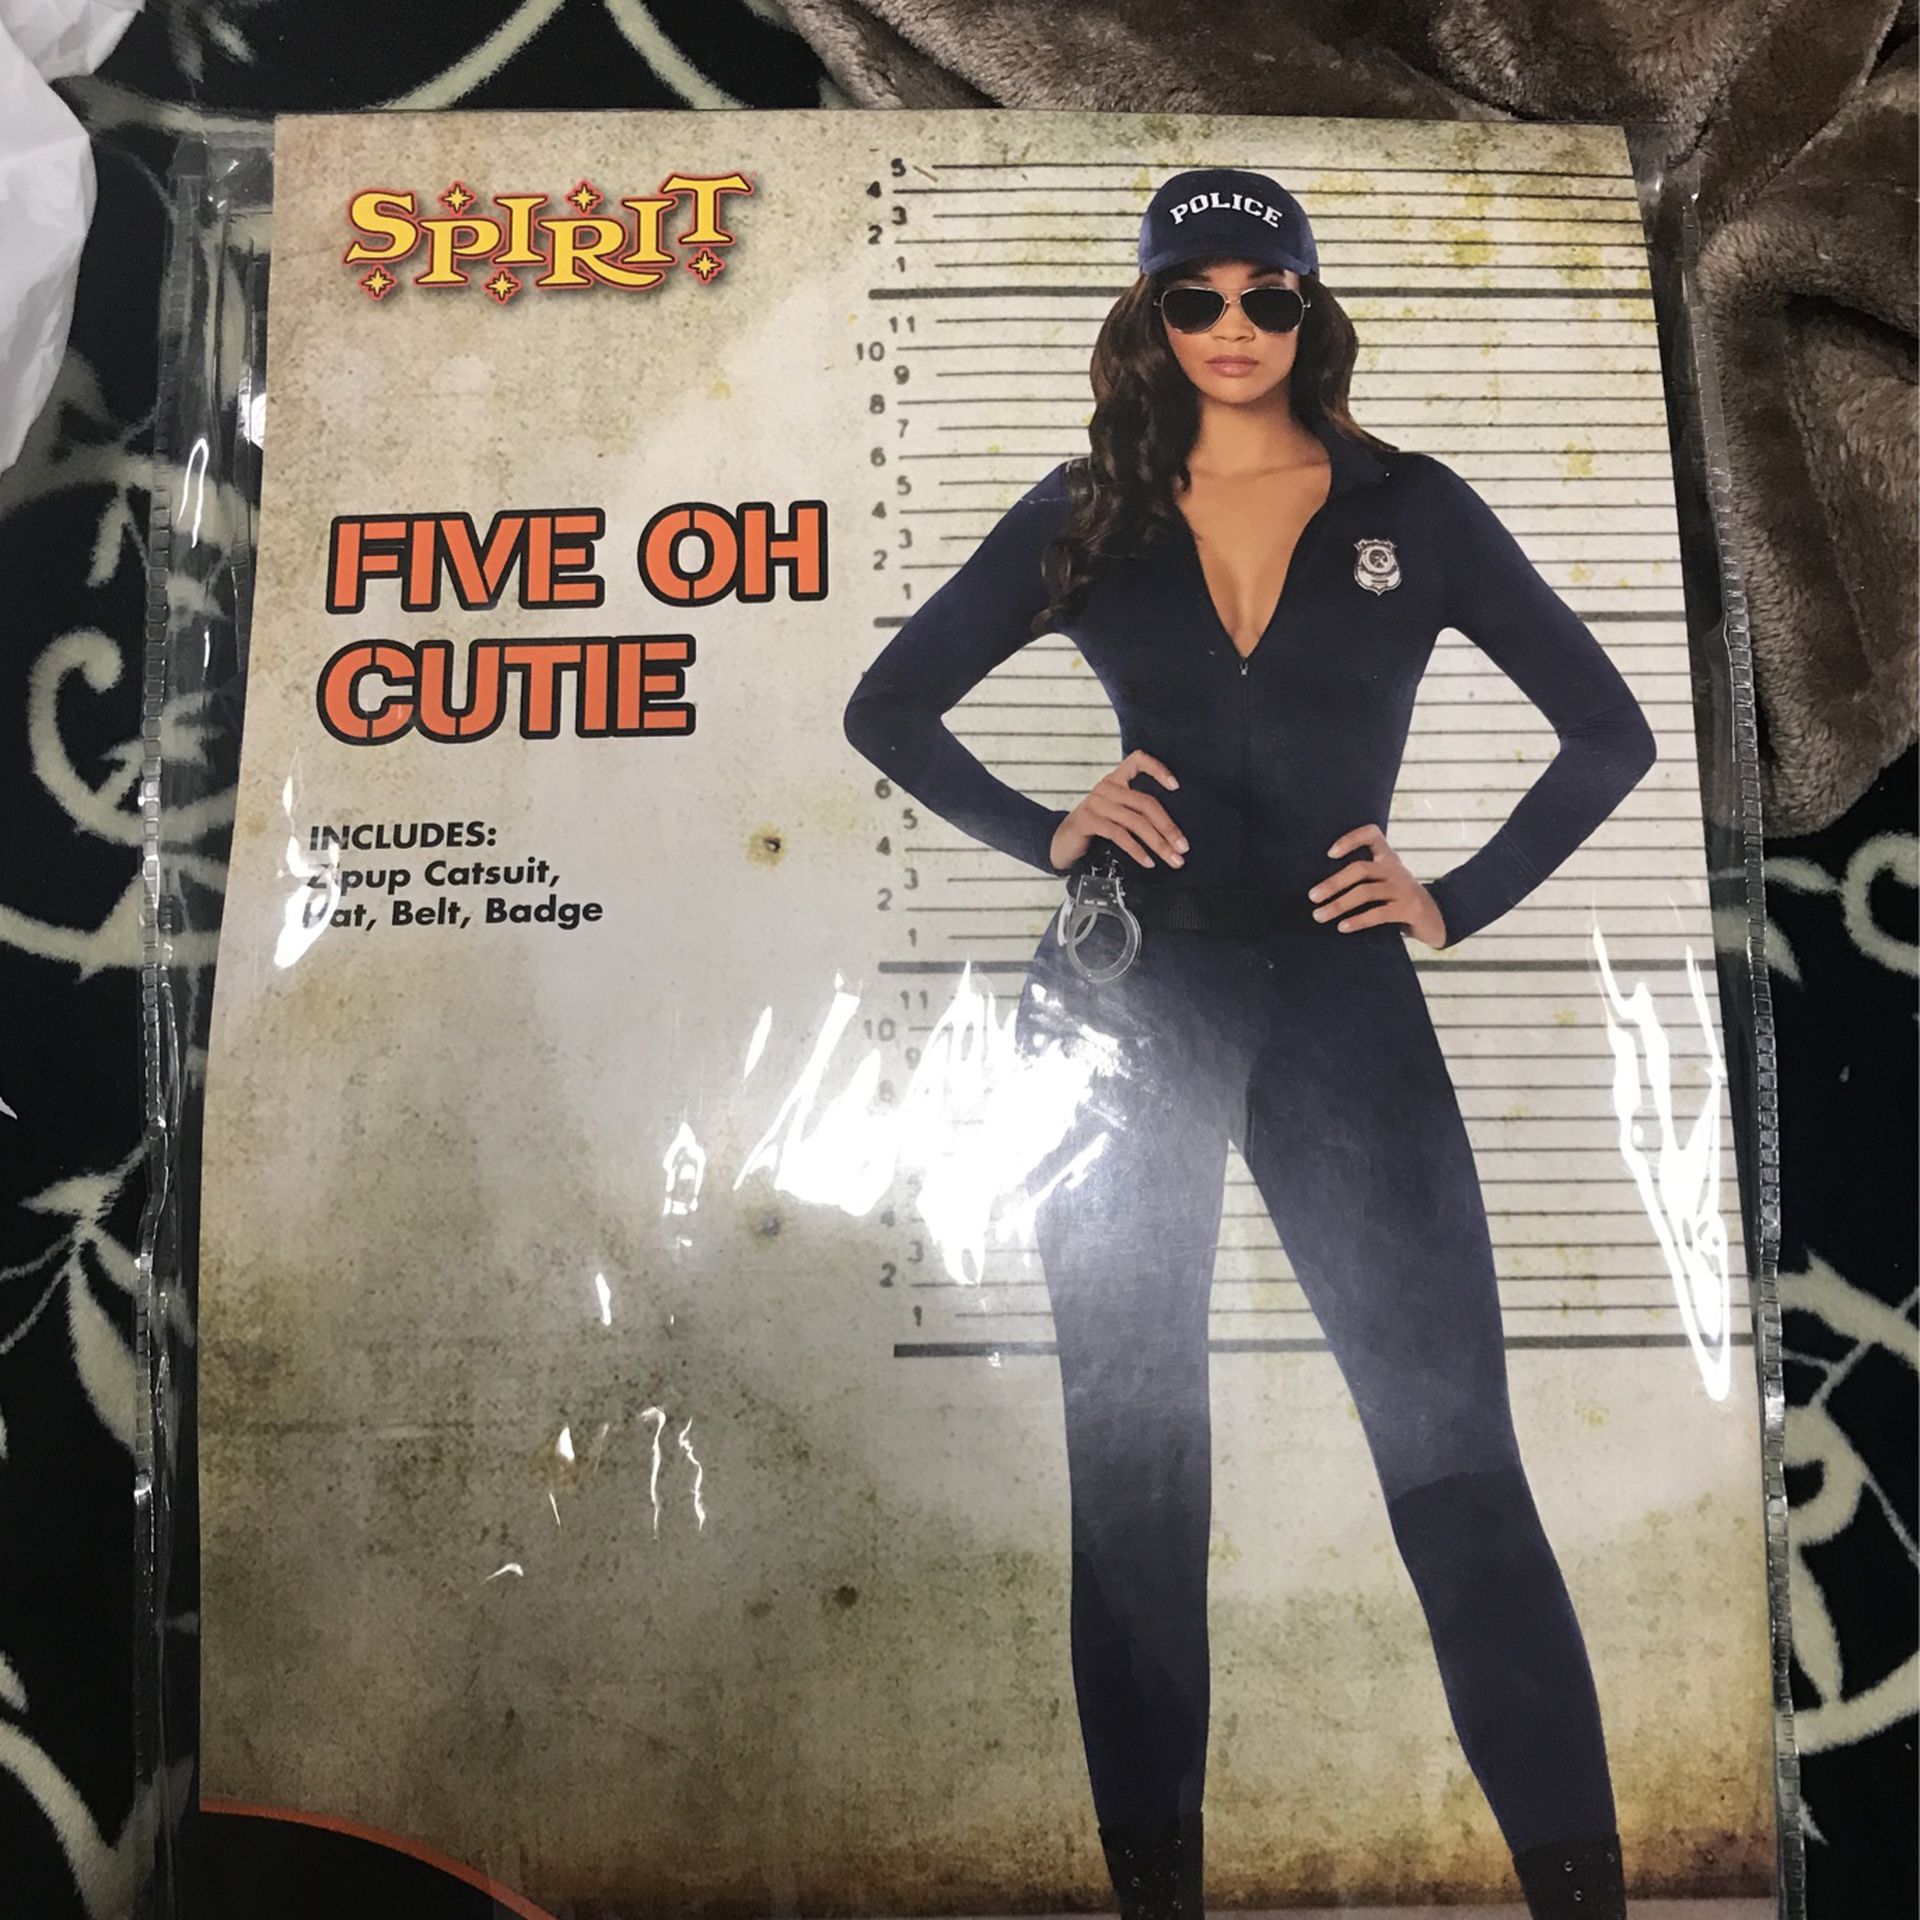 Five Oh Cutie Extra Small Costume For Sale! 